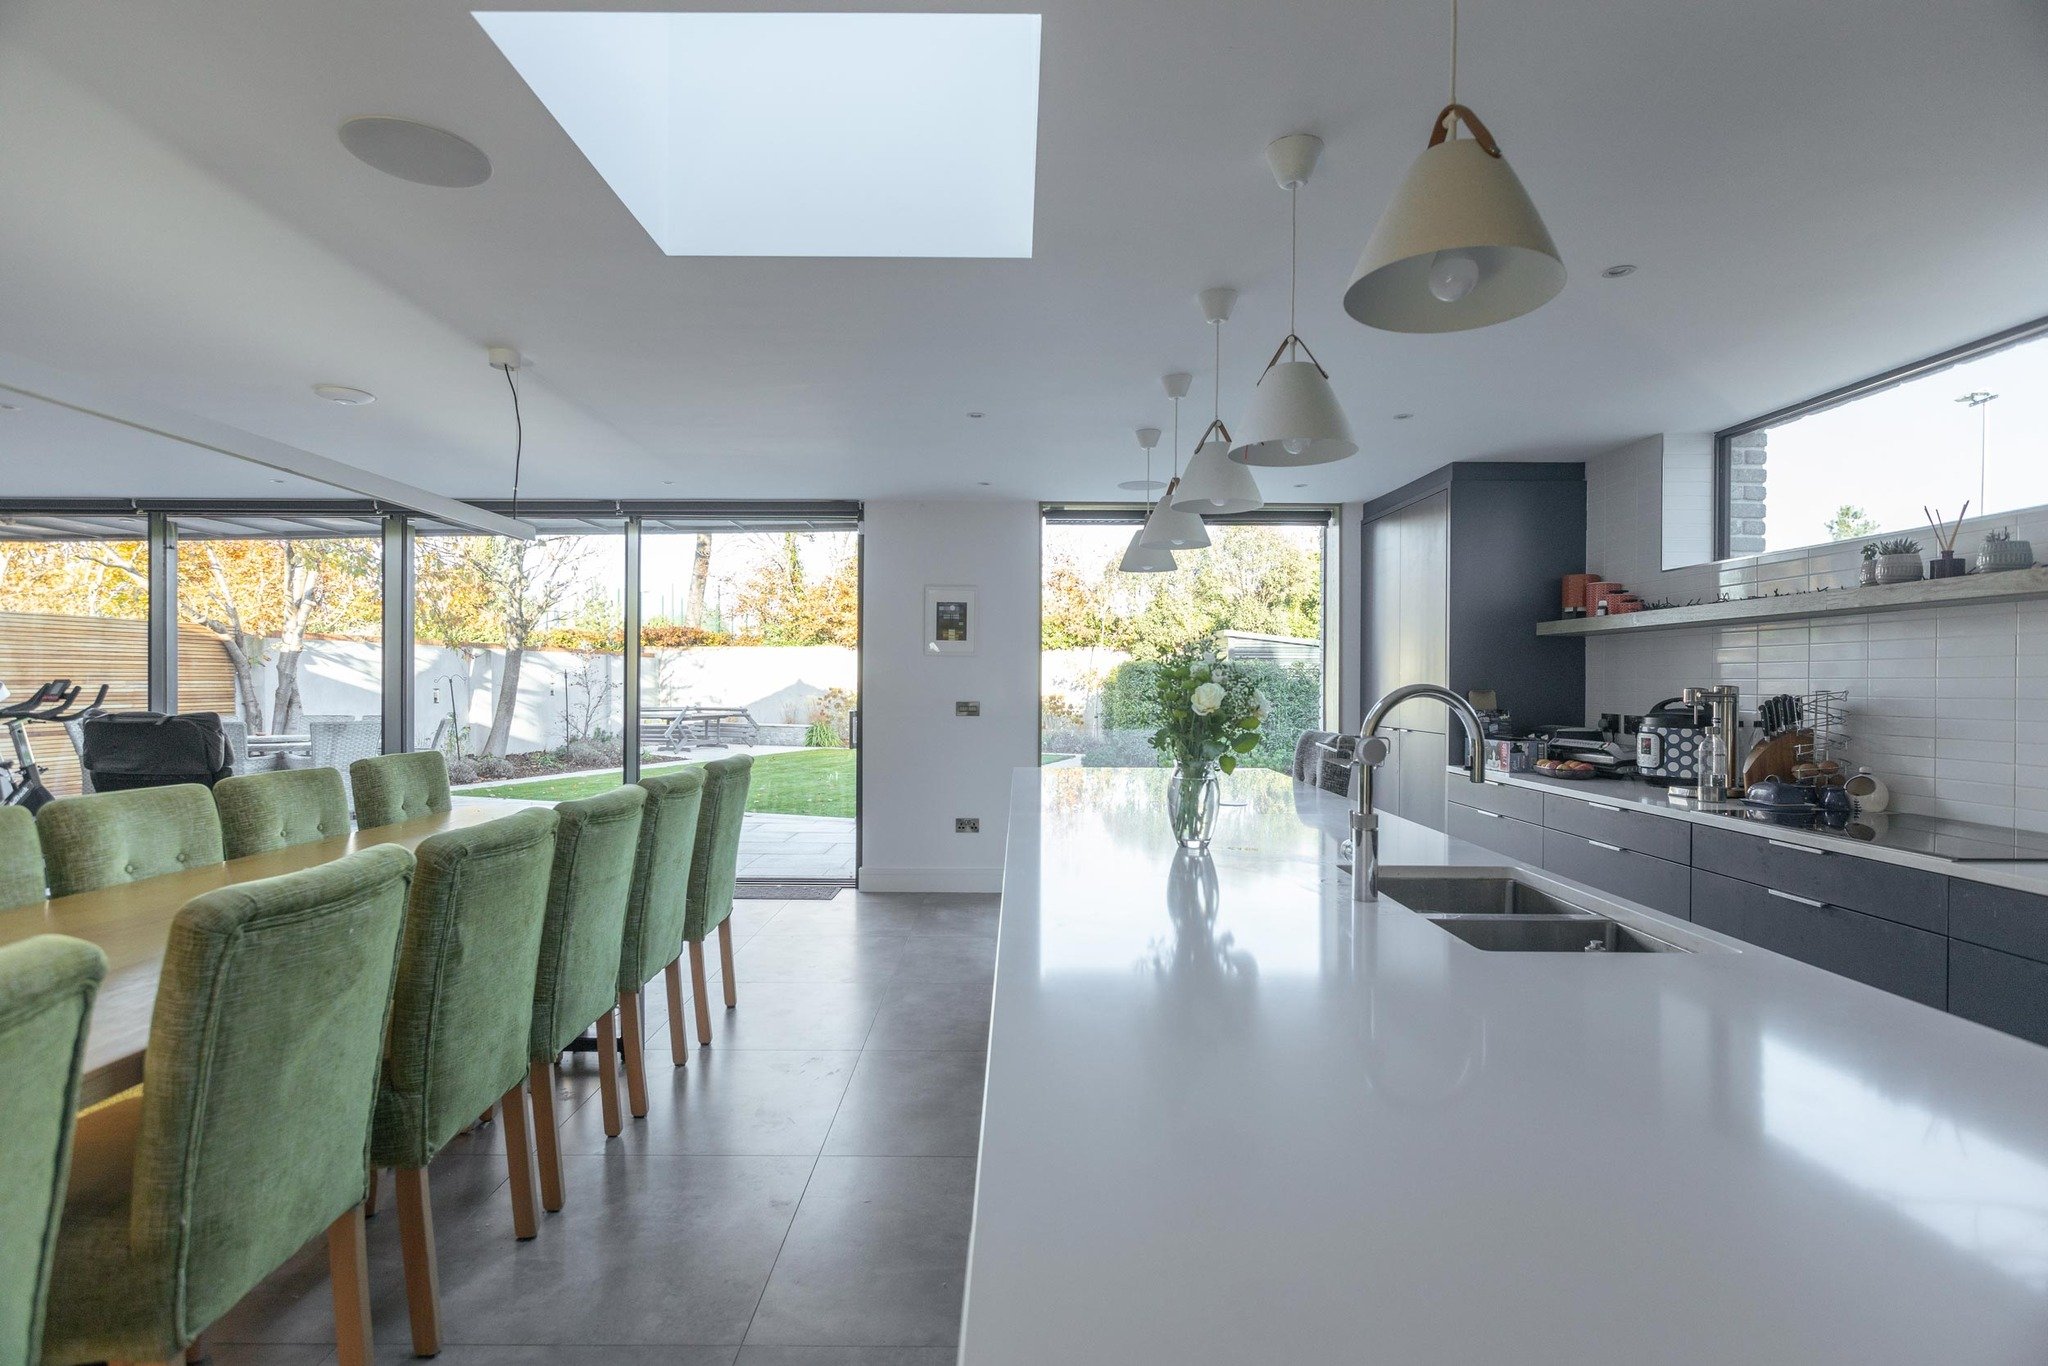 We always focus on bringing more natural light into our clients' homes when planning designs.

For this client, we chose three different types of windows for their open plan living area.

Large glass doors leading to the outside area, huge sky lights